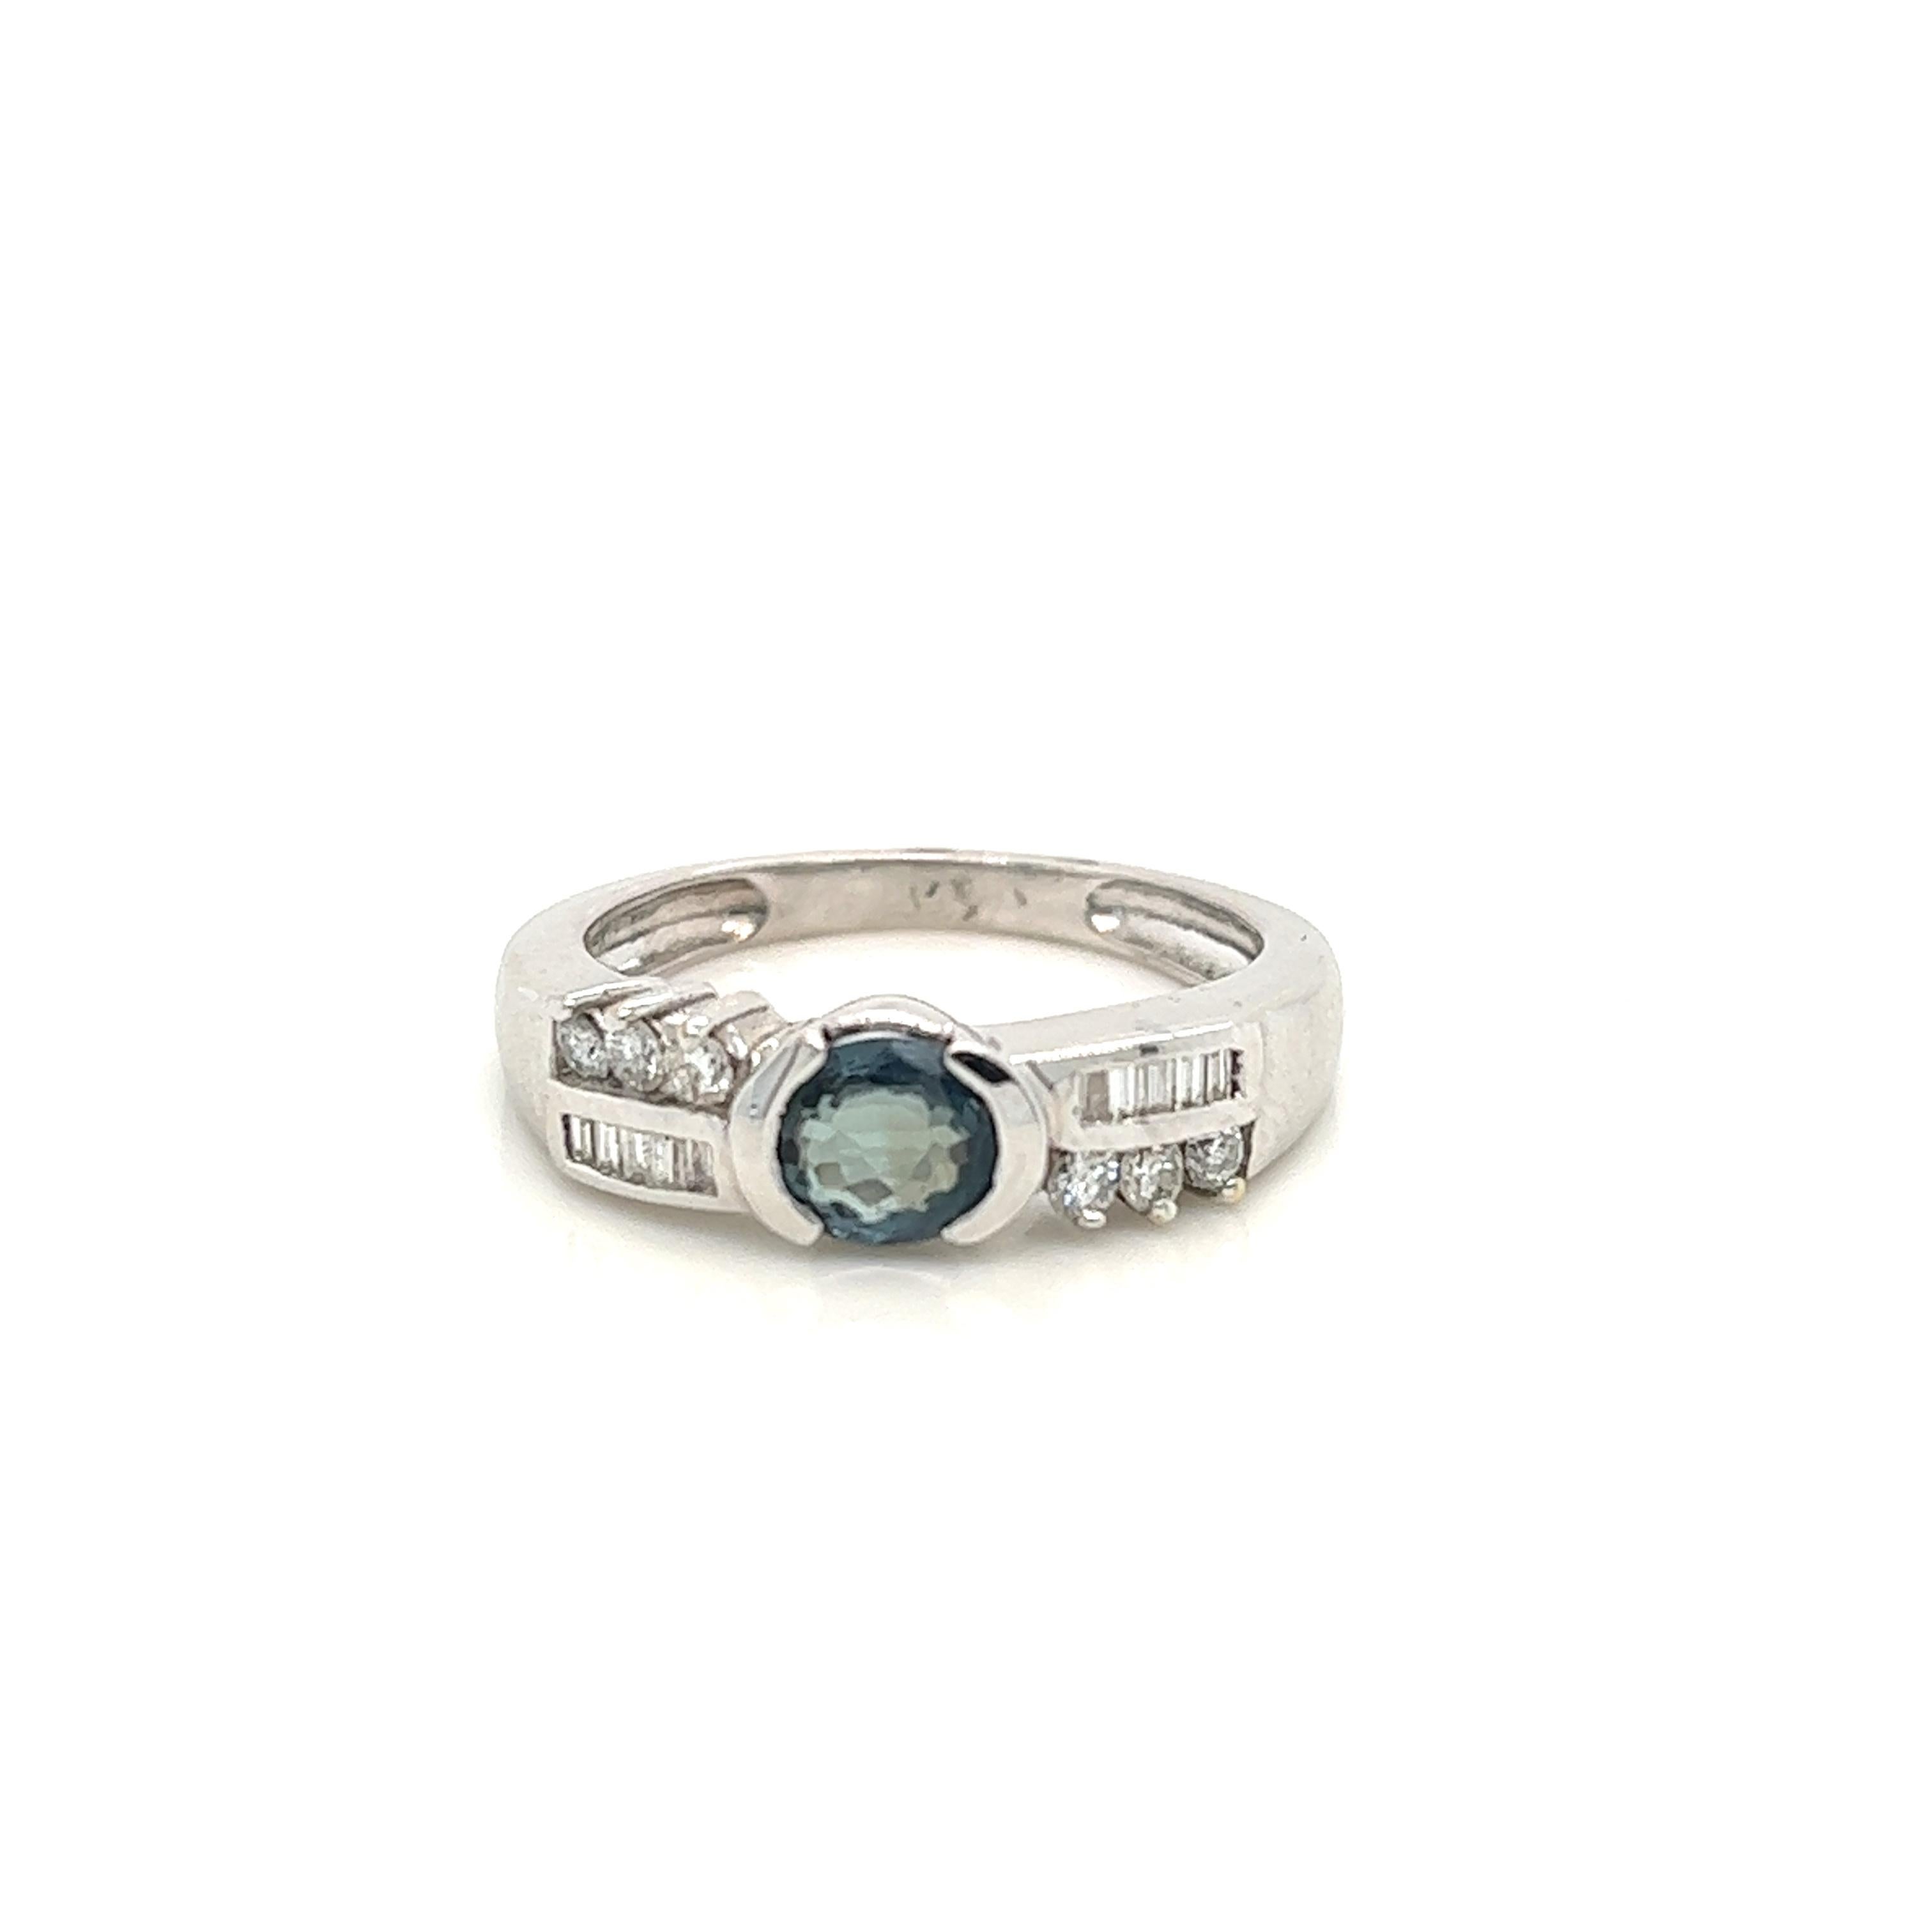 This is a gorgeous natural AAA quality Oval Alexandrite with Baguette diamonds that is set in solid 18K white gold. This ring features a natural 0.81 carat oval alexandrite that is certified by the Gemological Institute of America (GIA). The ring is